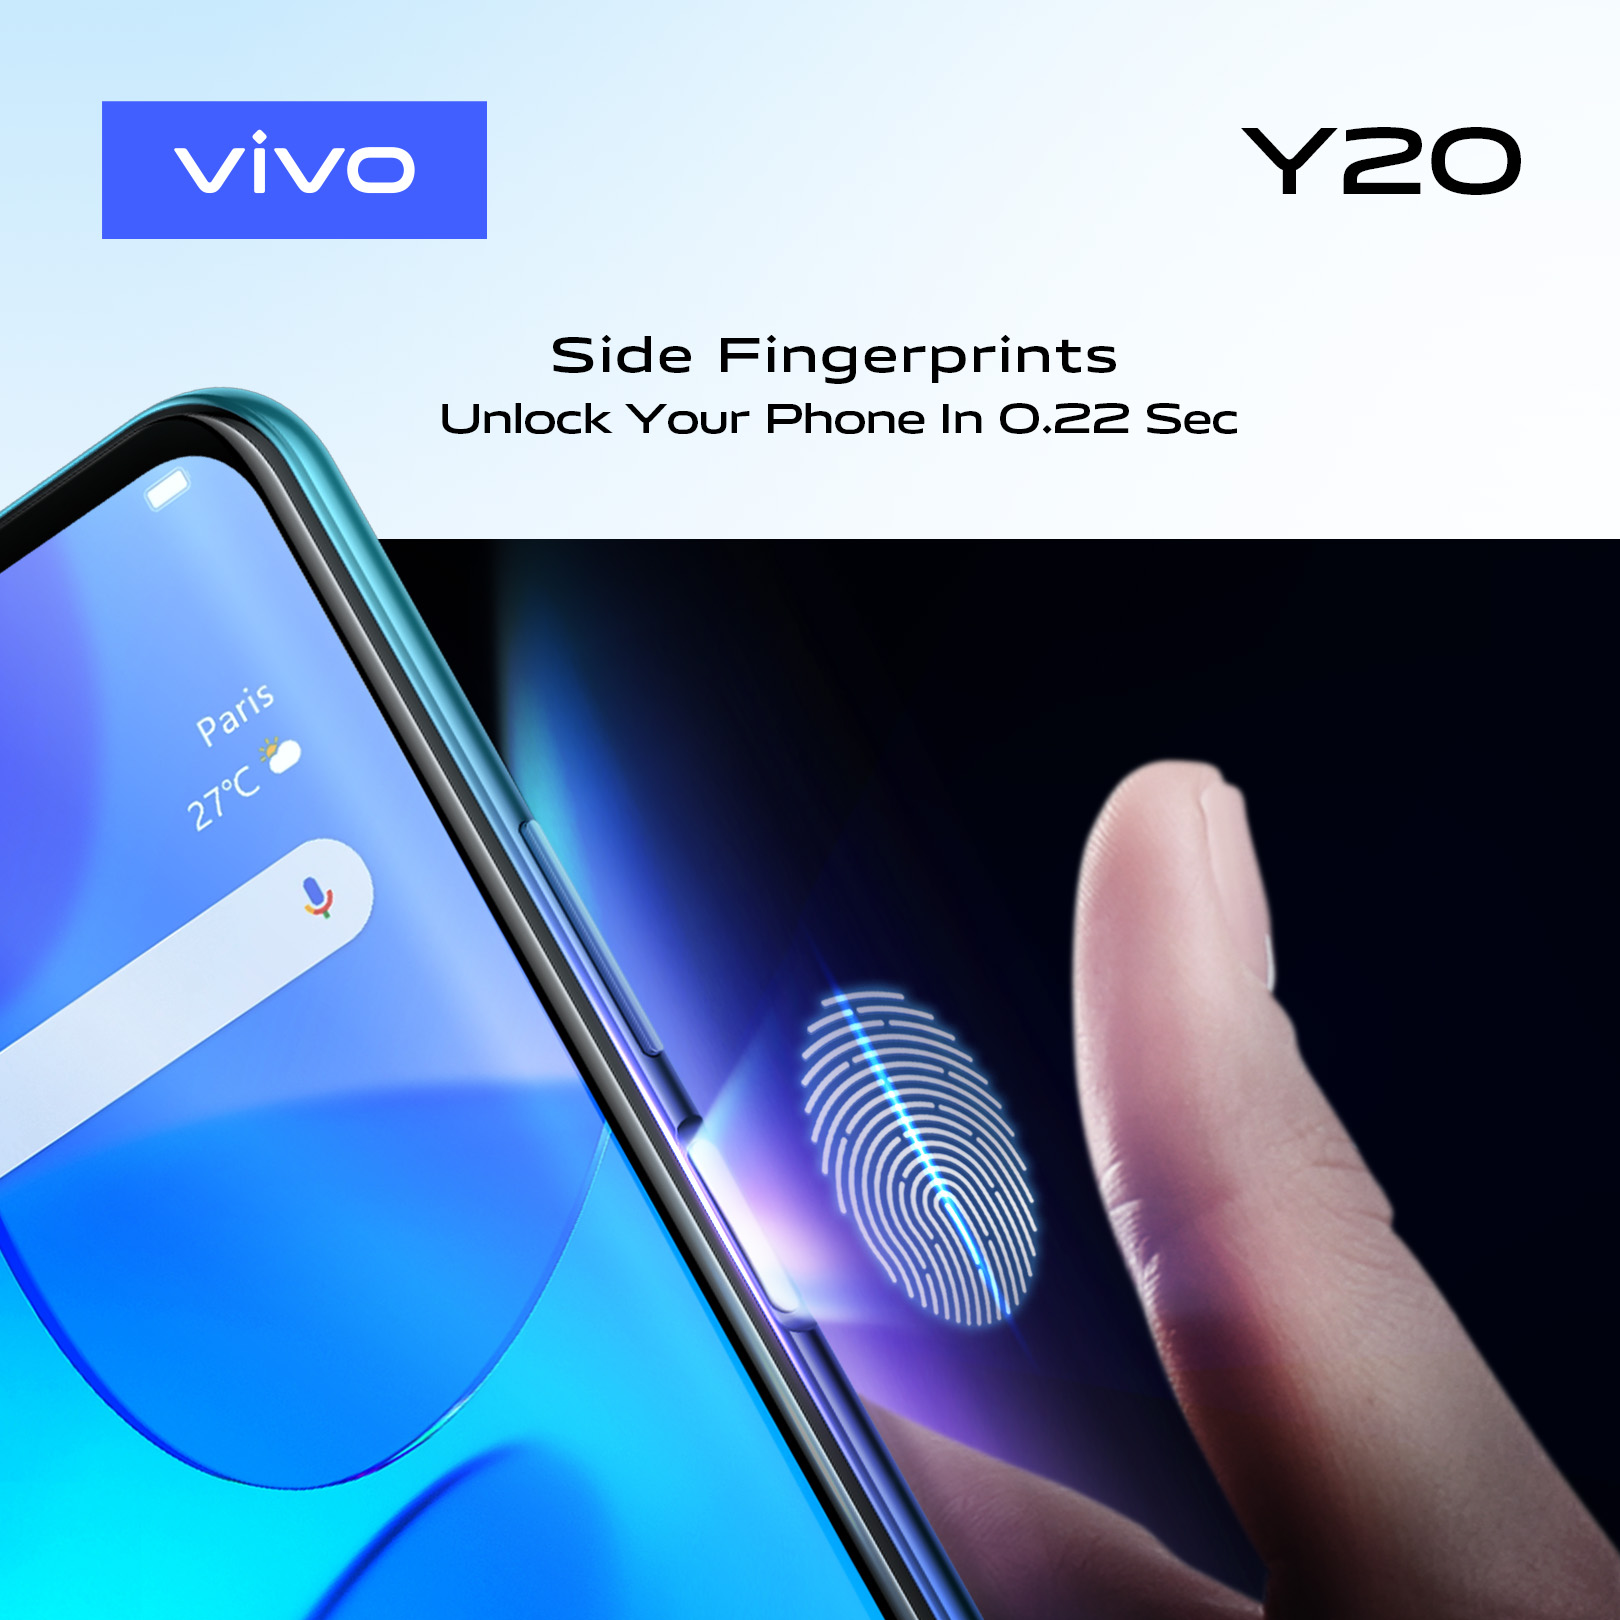 Vivo Y20 Specifications and Price in Kenya